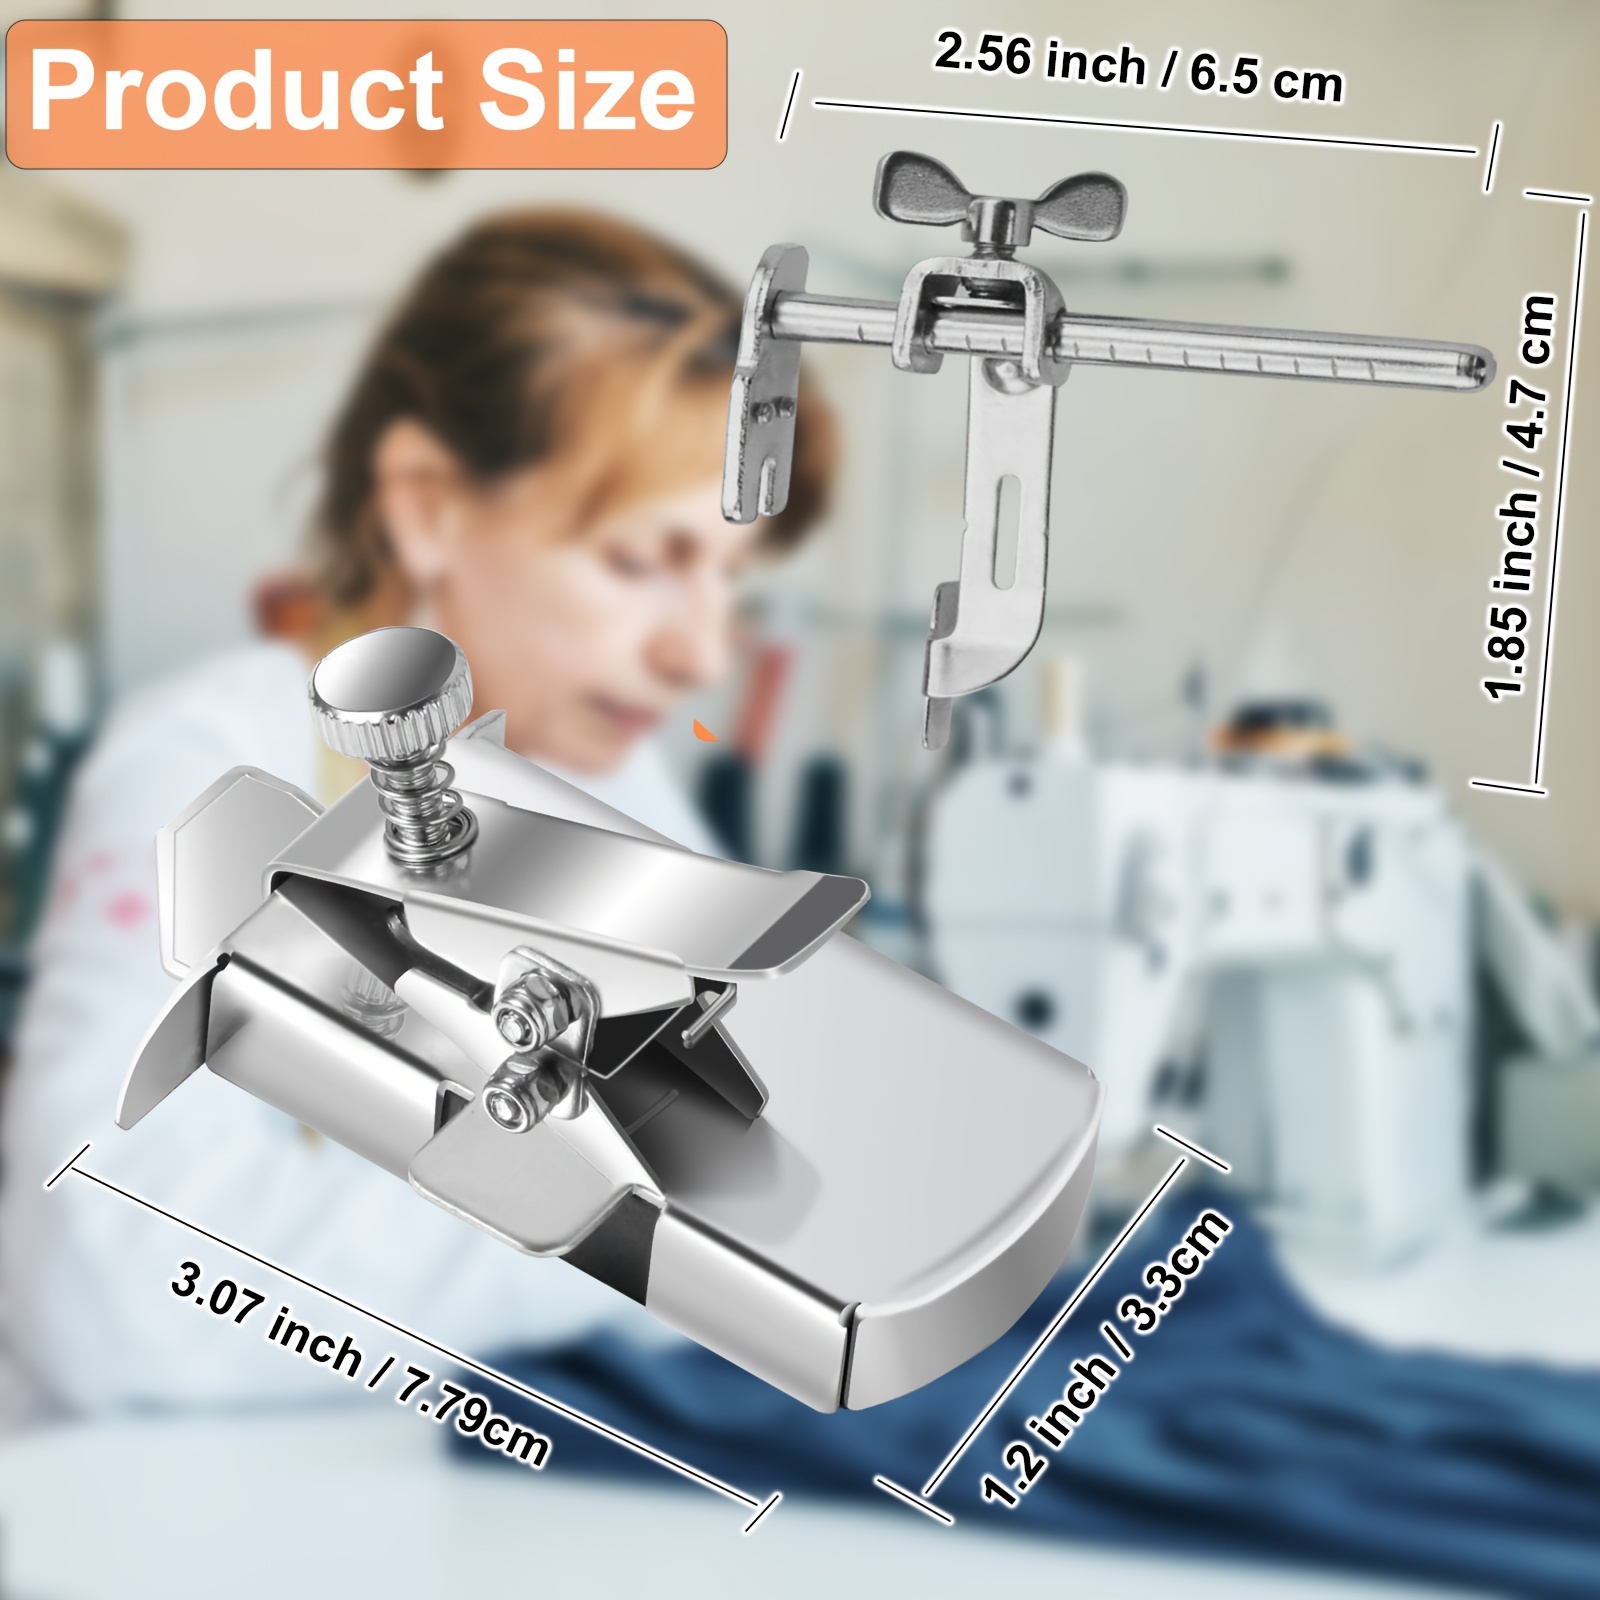 Buddy Sew Magnetic Seam Guide, Universal Sewing Machine Attachments, Sewing  Machine Presser Foot, Multifucntional Straight Line Hems Sewing Ruler for